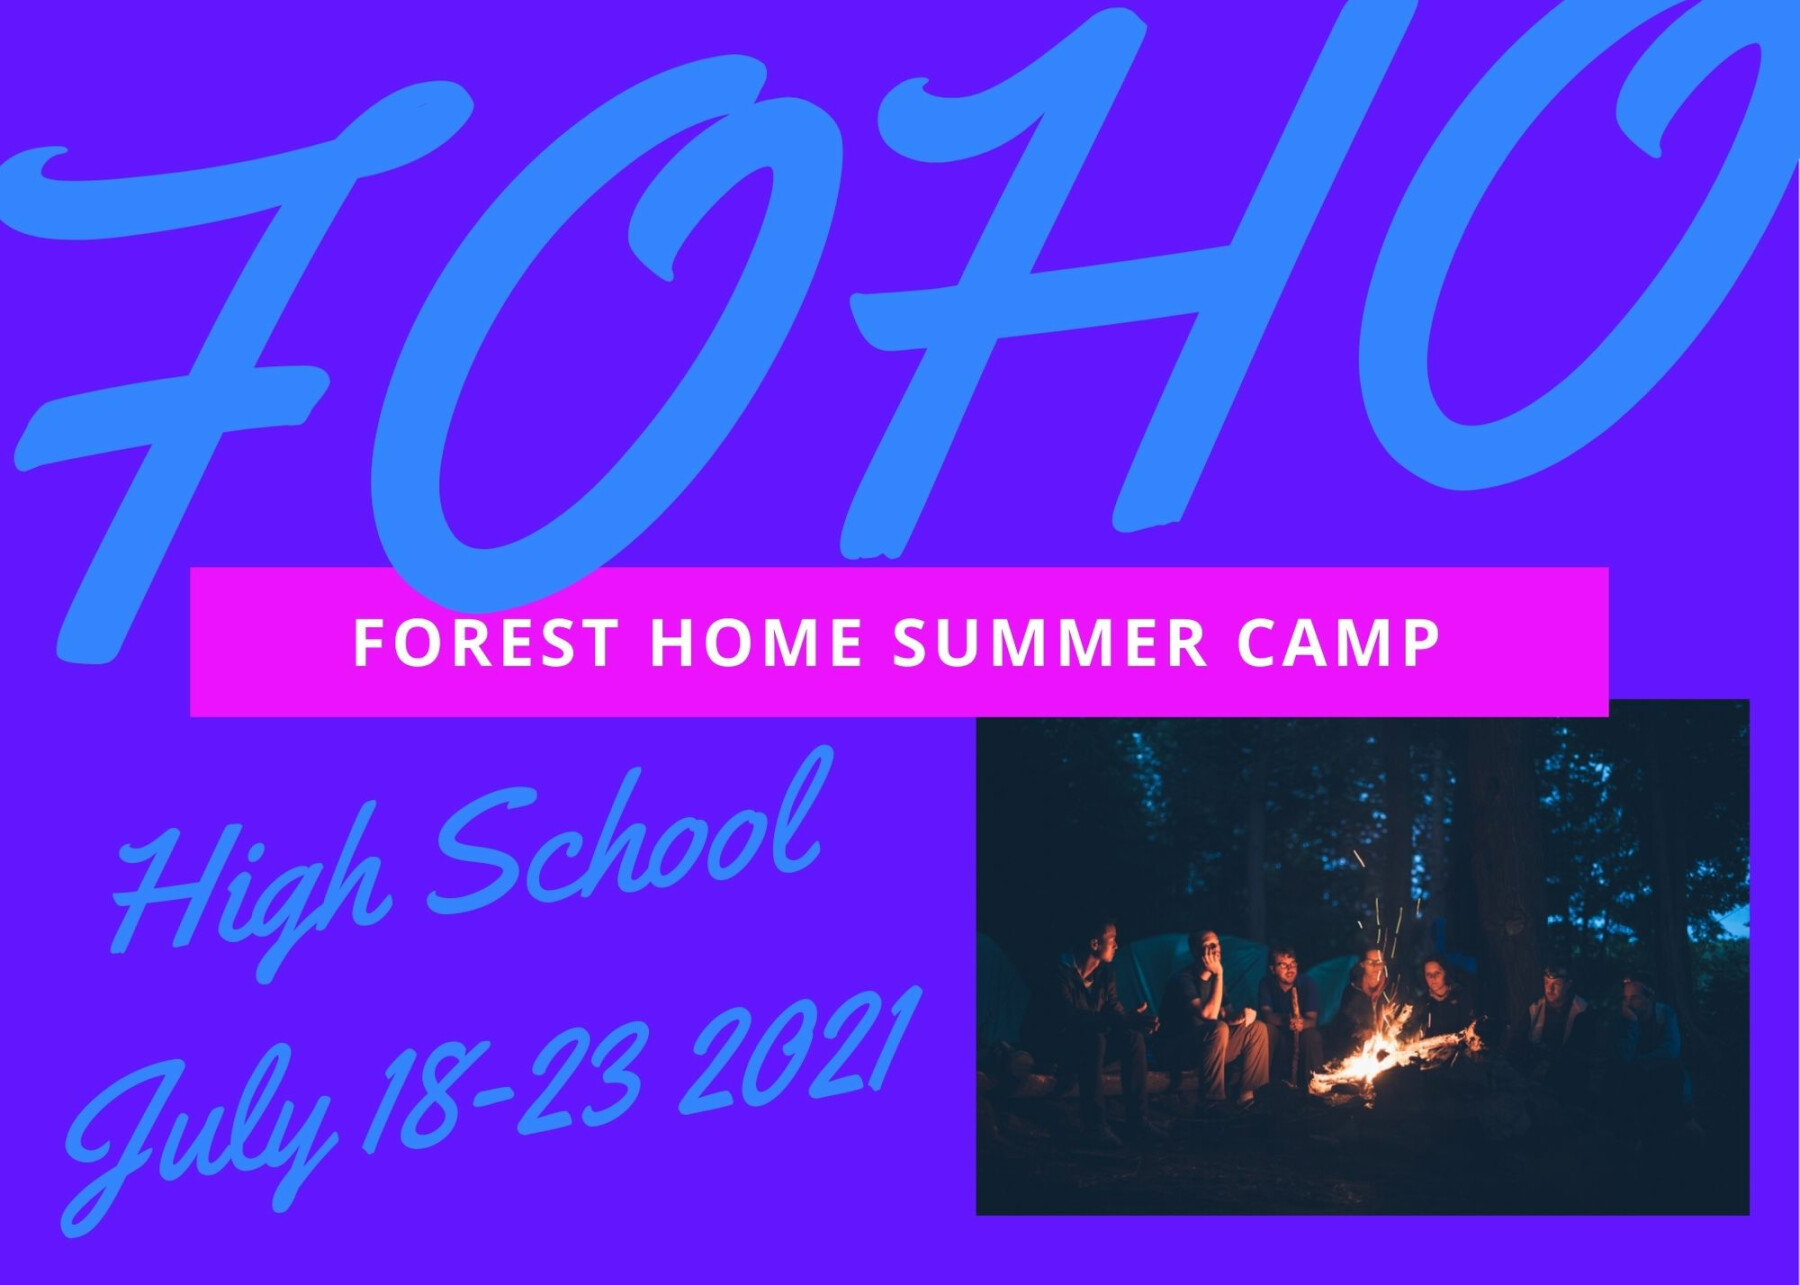 Forest Home Summer Camp, Forest Falls, CA - High School